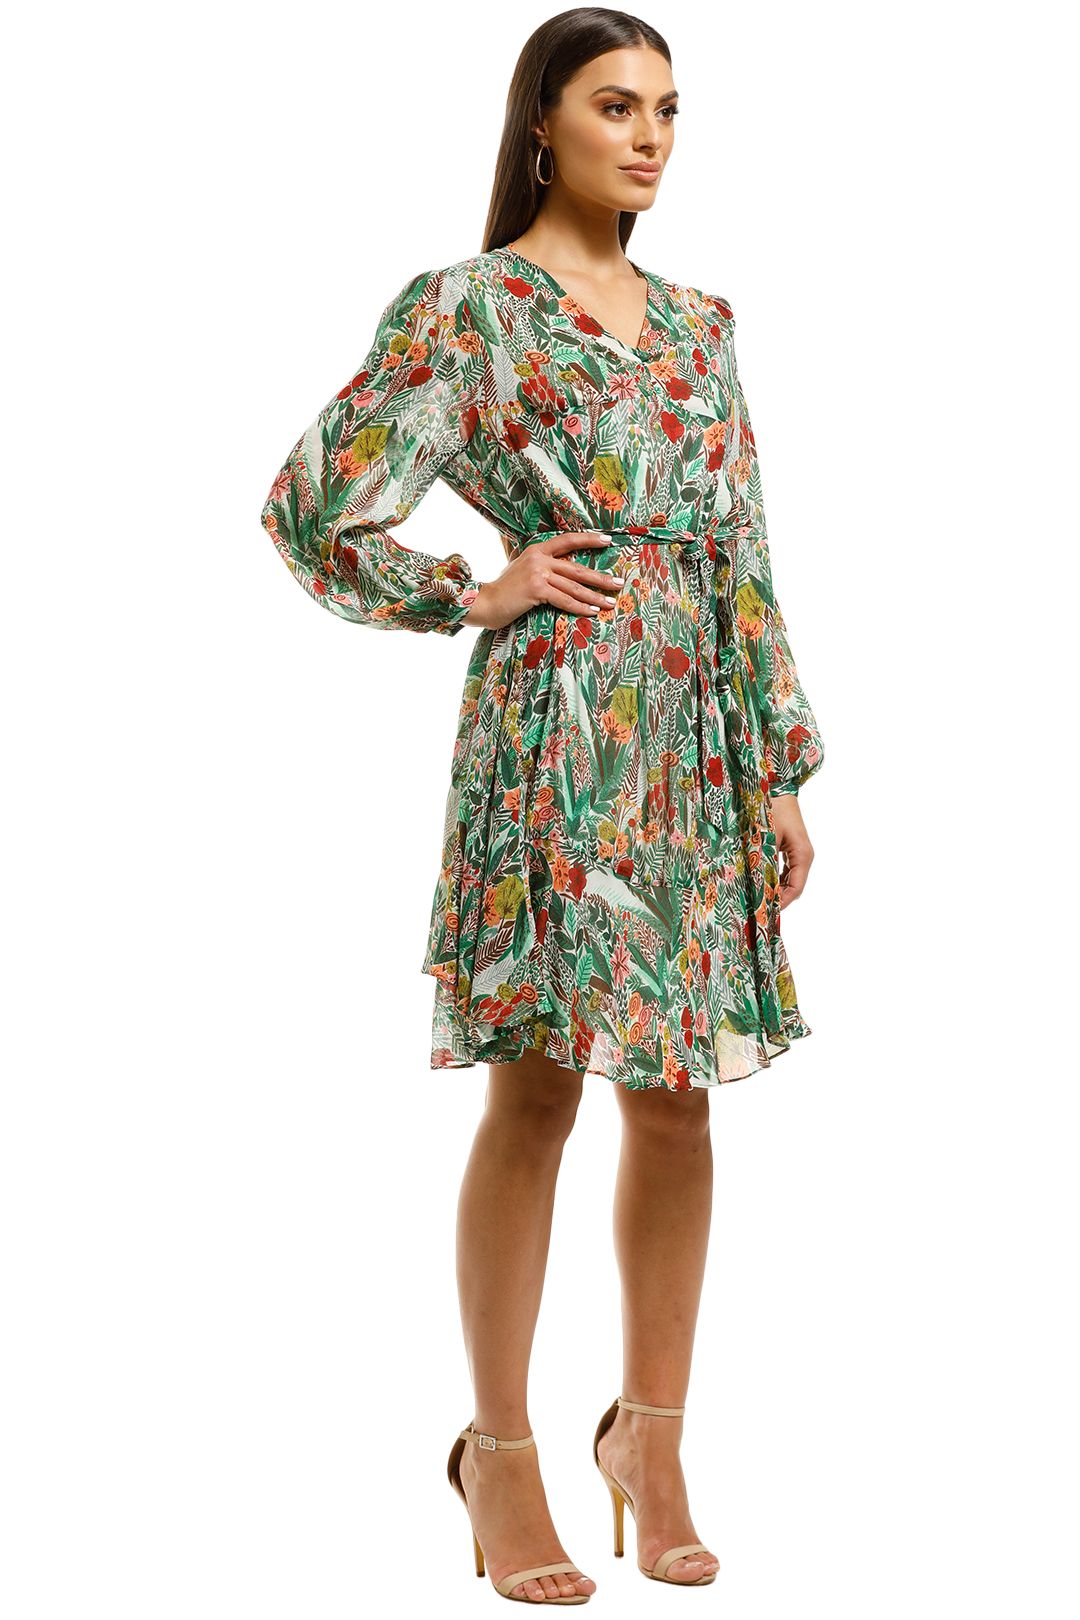 Trelise-Cooper-Aloe-You-Vera-Much-Dress-Floral-Print-Side